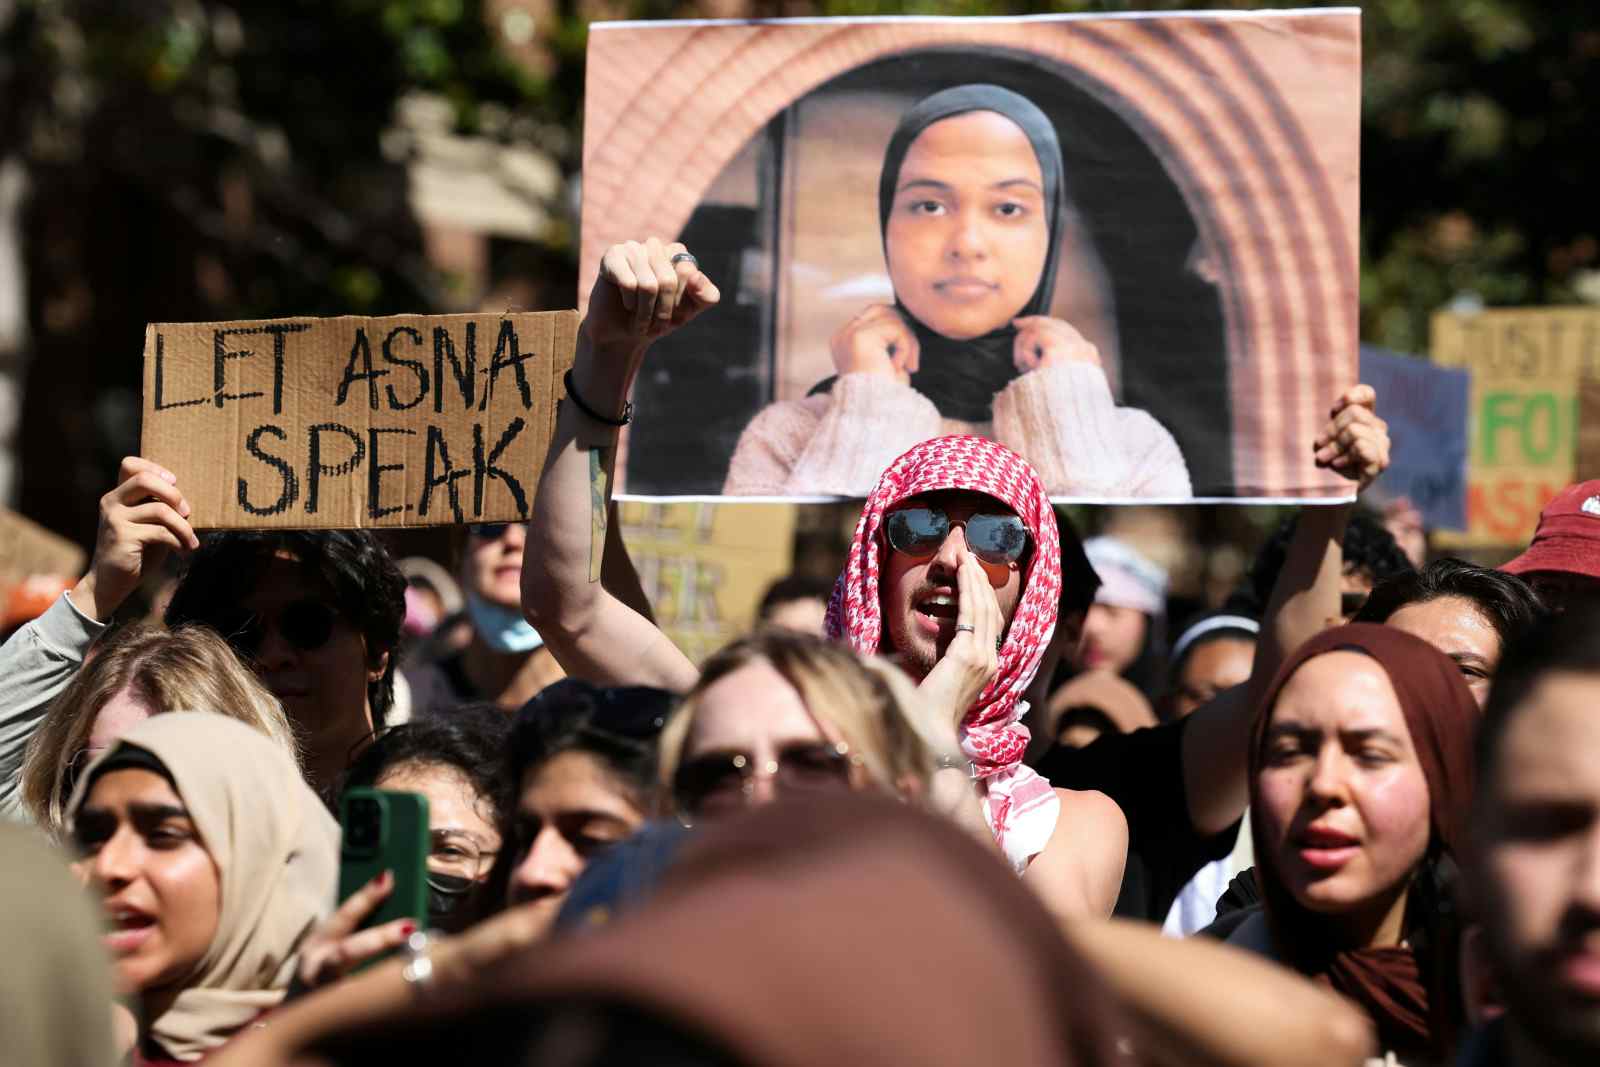 USC students participate in a silent march in support of Asna Tabassum, whose graduation speech has been cancelled by USC administration, on Thursday, April 18, 2024 in Los Angeles, California (Wally Skalij / Los Angeles Times via Getty Images)